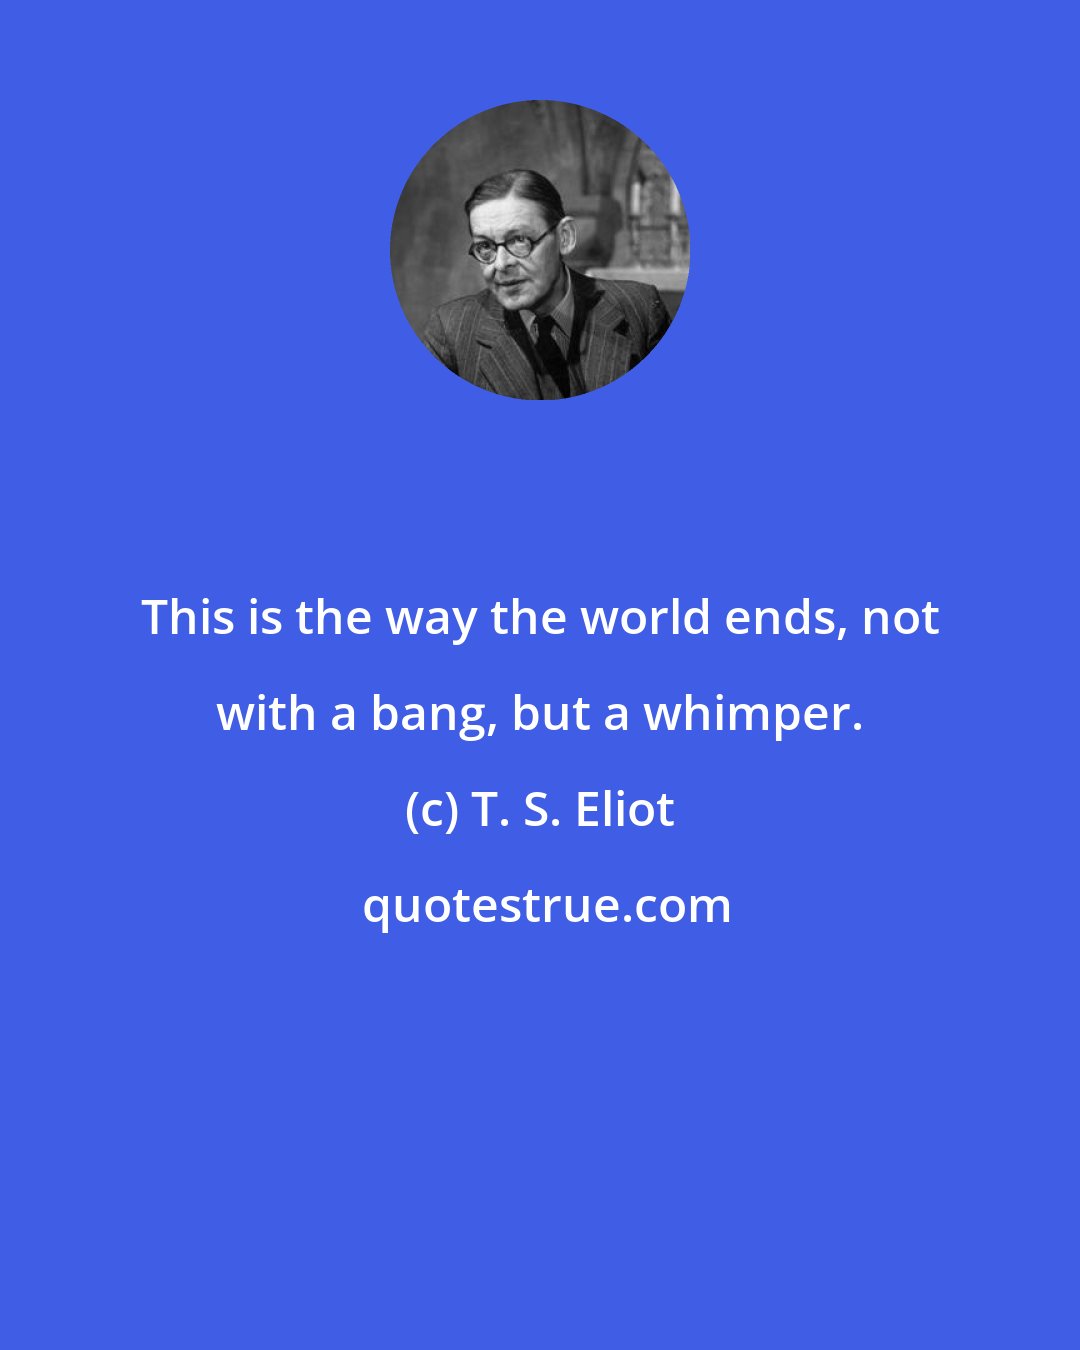 T. S. Eliot: This is the way the world ends, not with a bang, but a whimper.